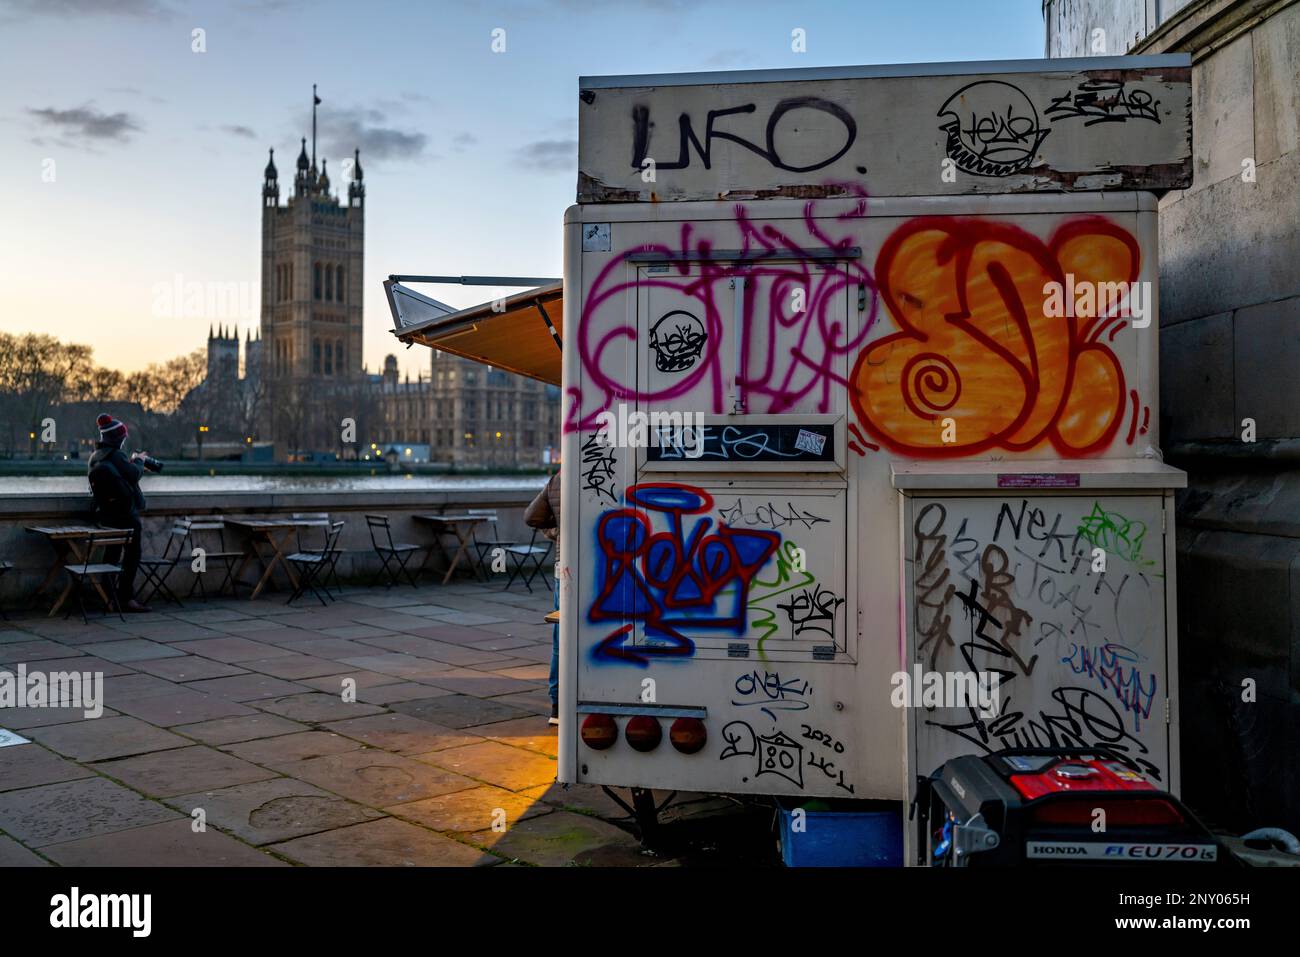 Graffitti Cafe Opposite the Houses of Parliament, London, England Stock Photo